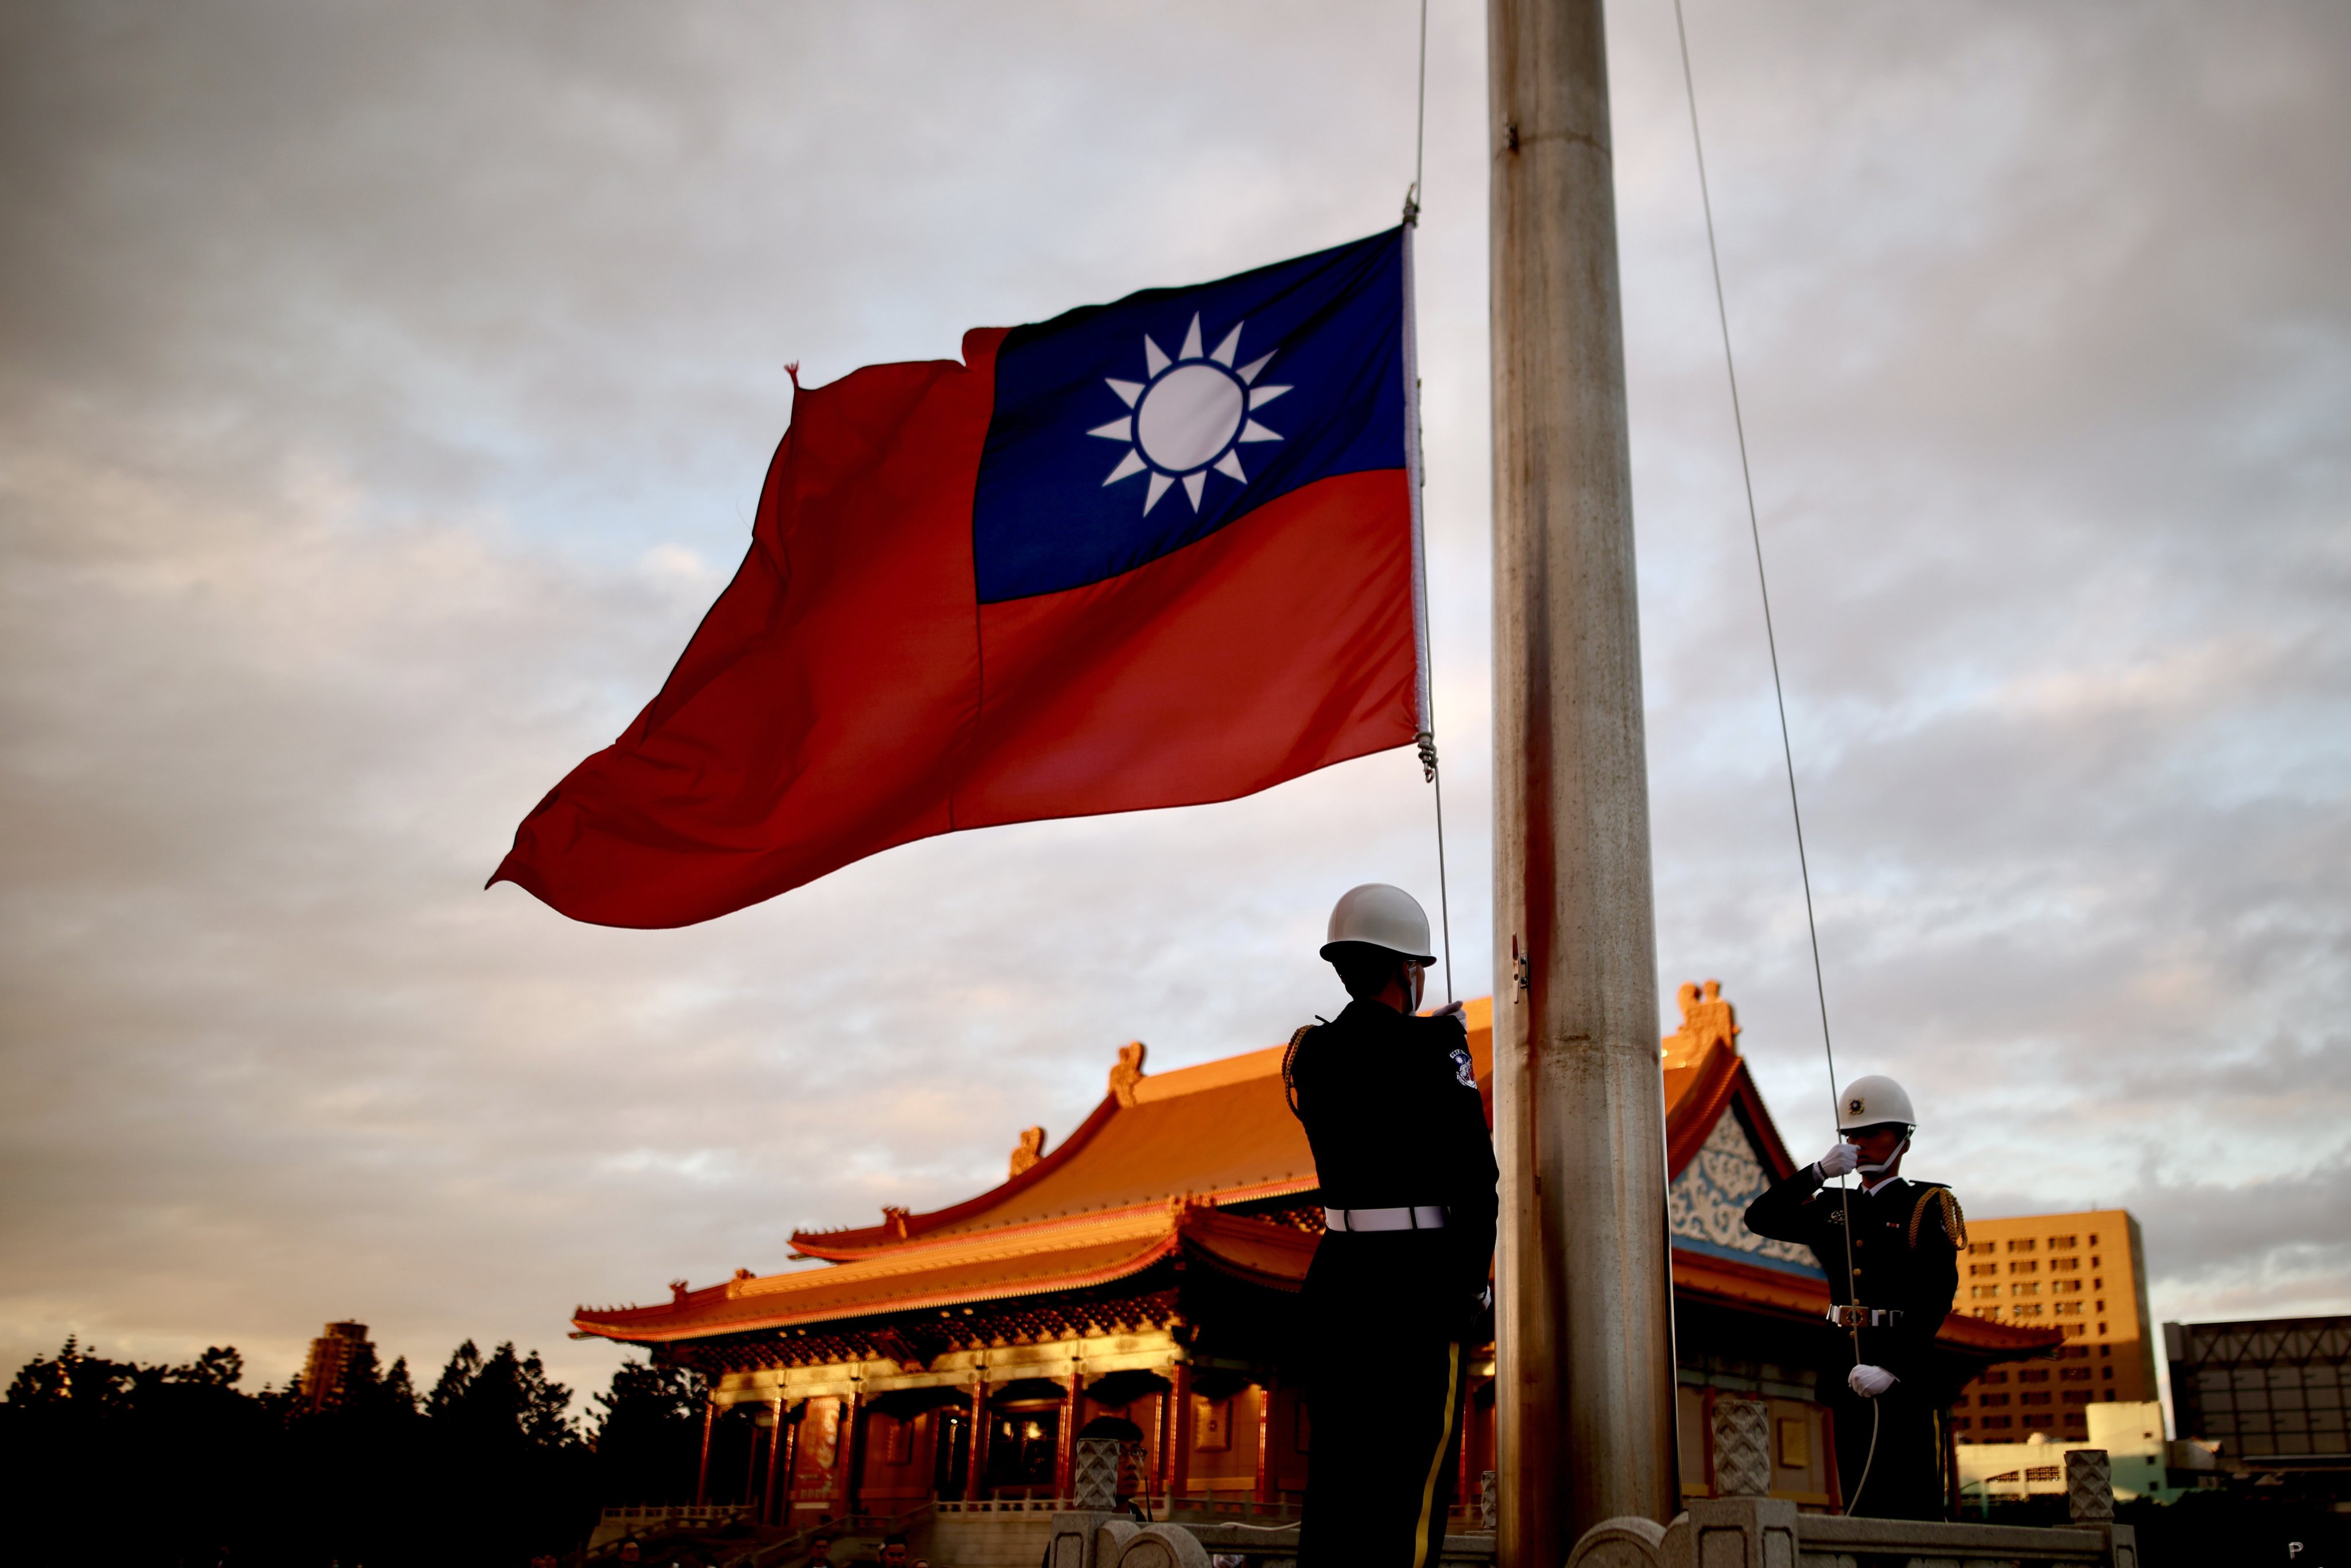 Guards lower Taiwan’s flag in Liberty Square in Taipei on January 16. Photo: EPA-EFE